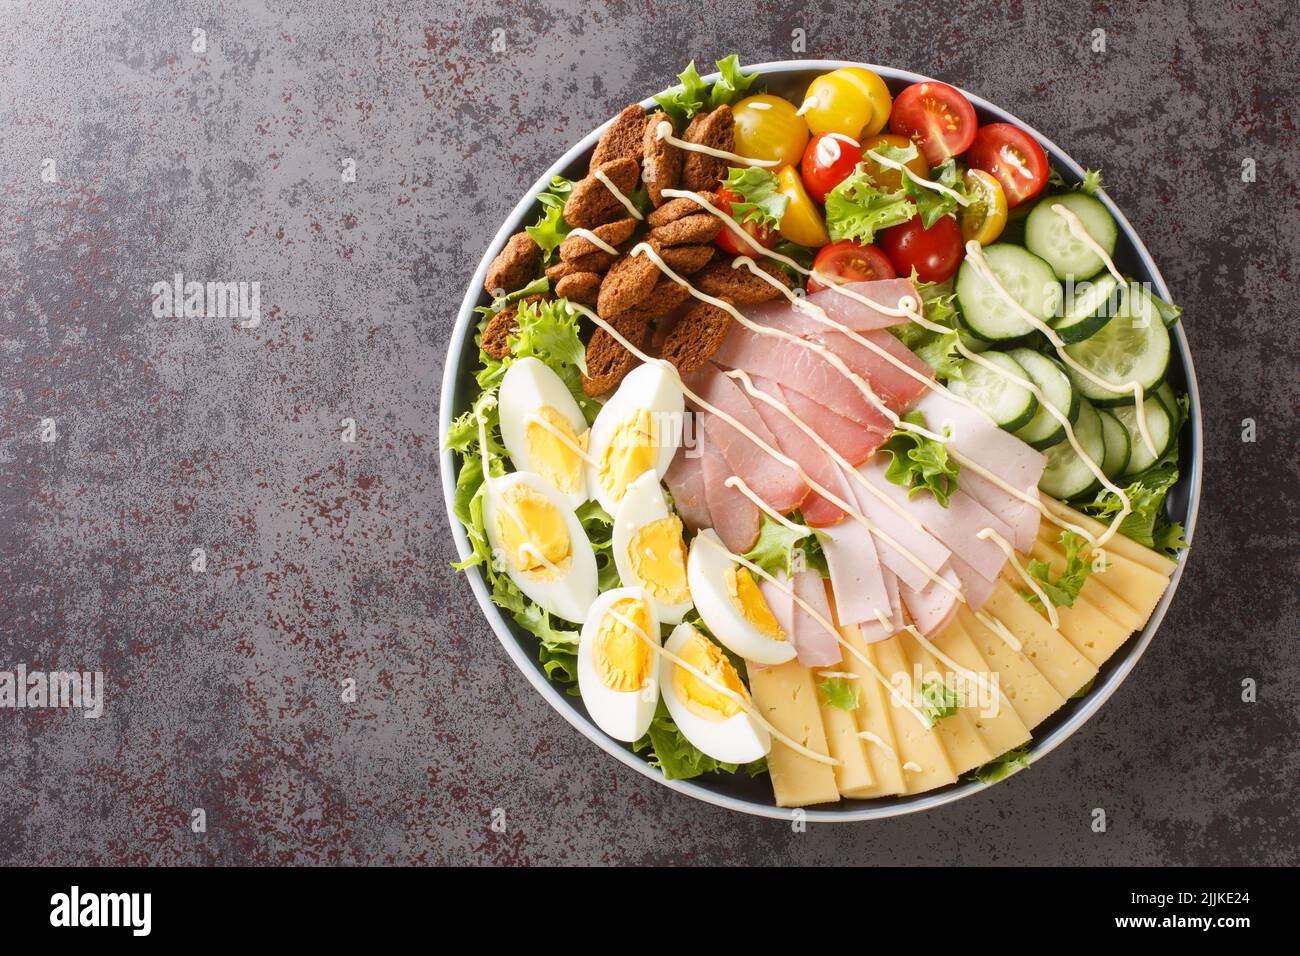 American hearty chef salad of vegetables, lettuce, eggs, cheese, croutons and several types of meat close-up in a plate on the table. horizontal top v Stock Photo